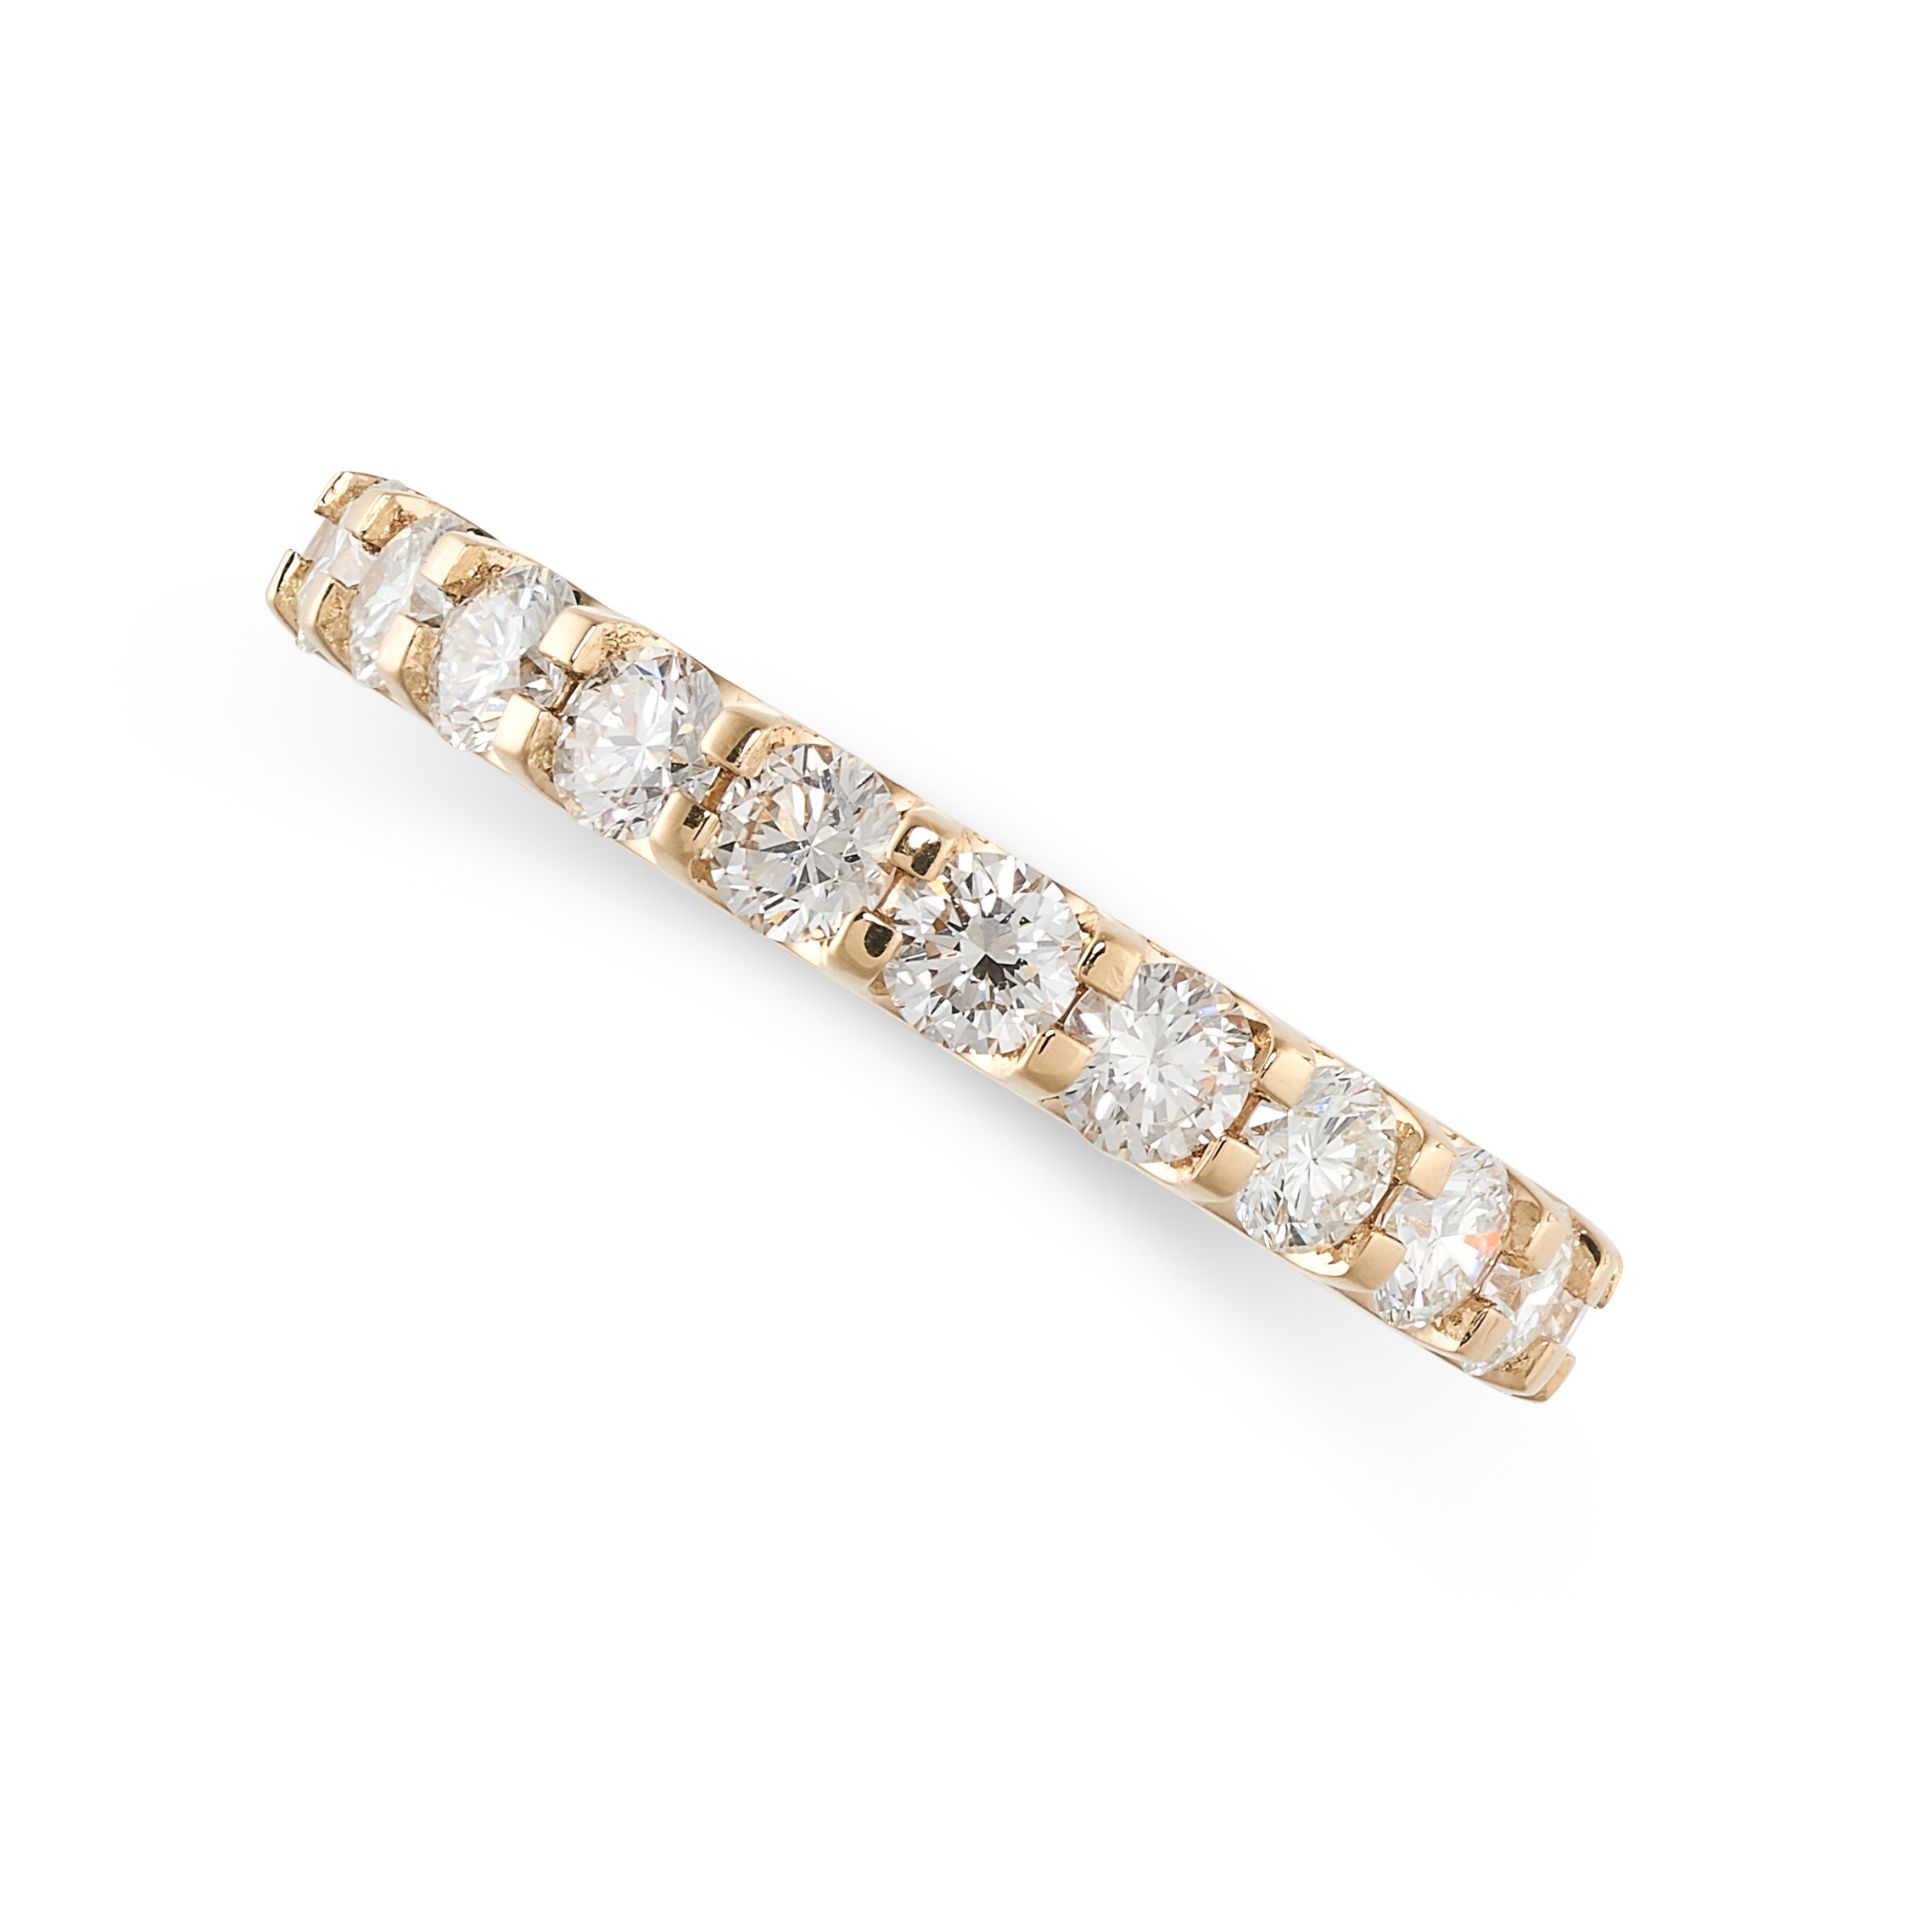 A DIAMOND FULL ETERNITY RING the band set all around with a single row of round cut diamonds, the - Image 2 of 2